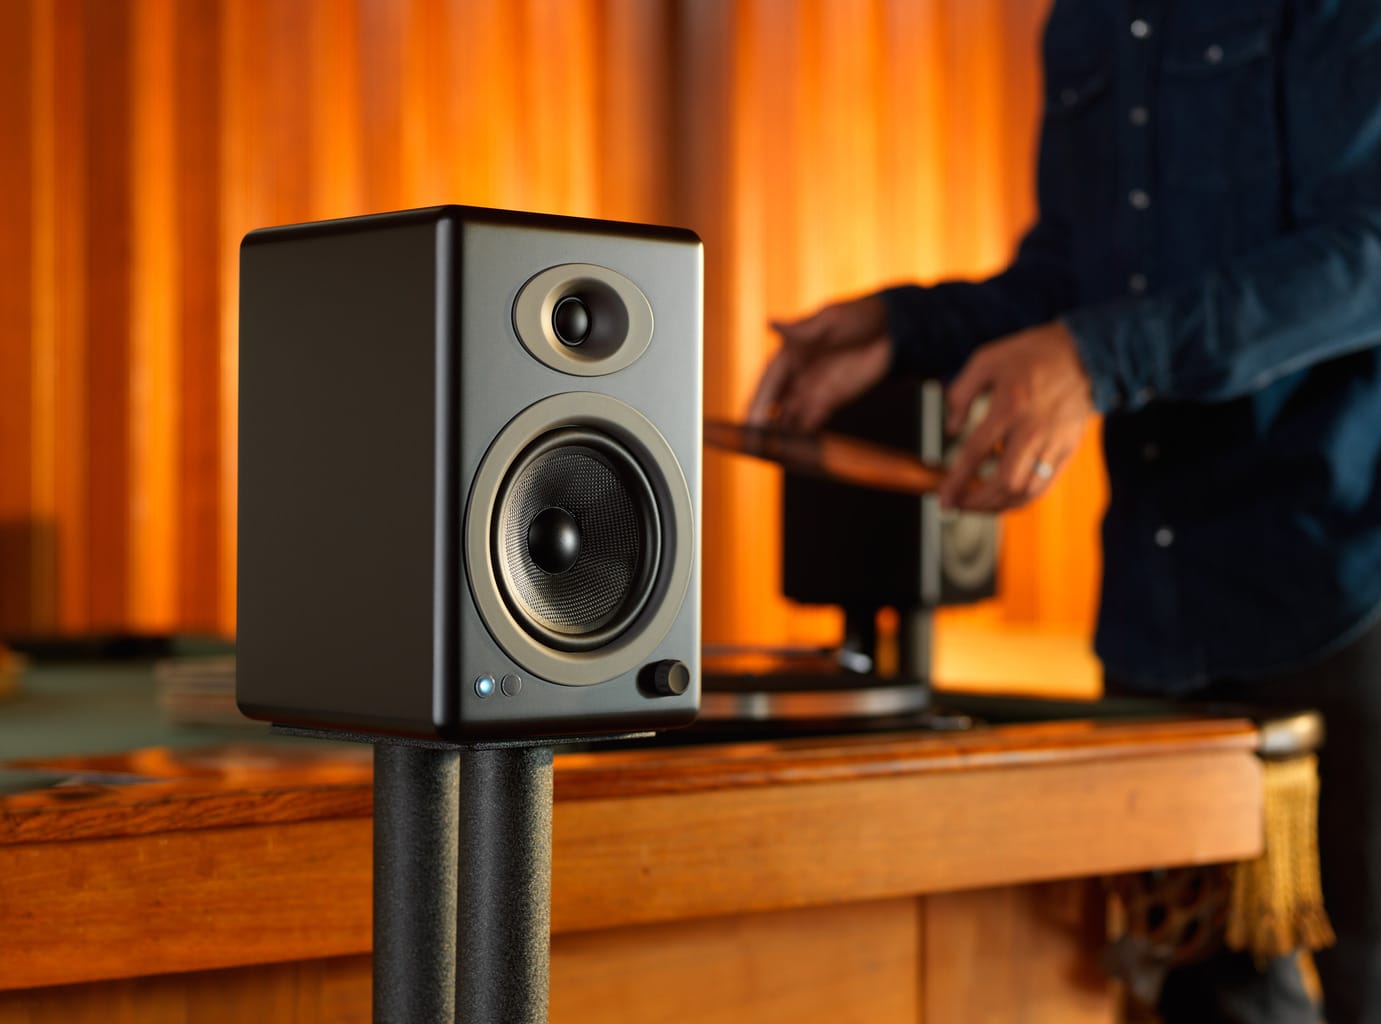 The Real Techie Review on the A5+ Wireless Speakers